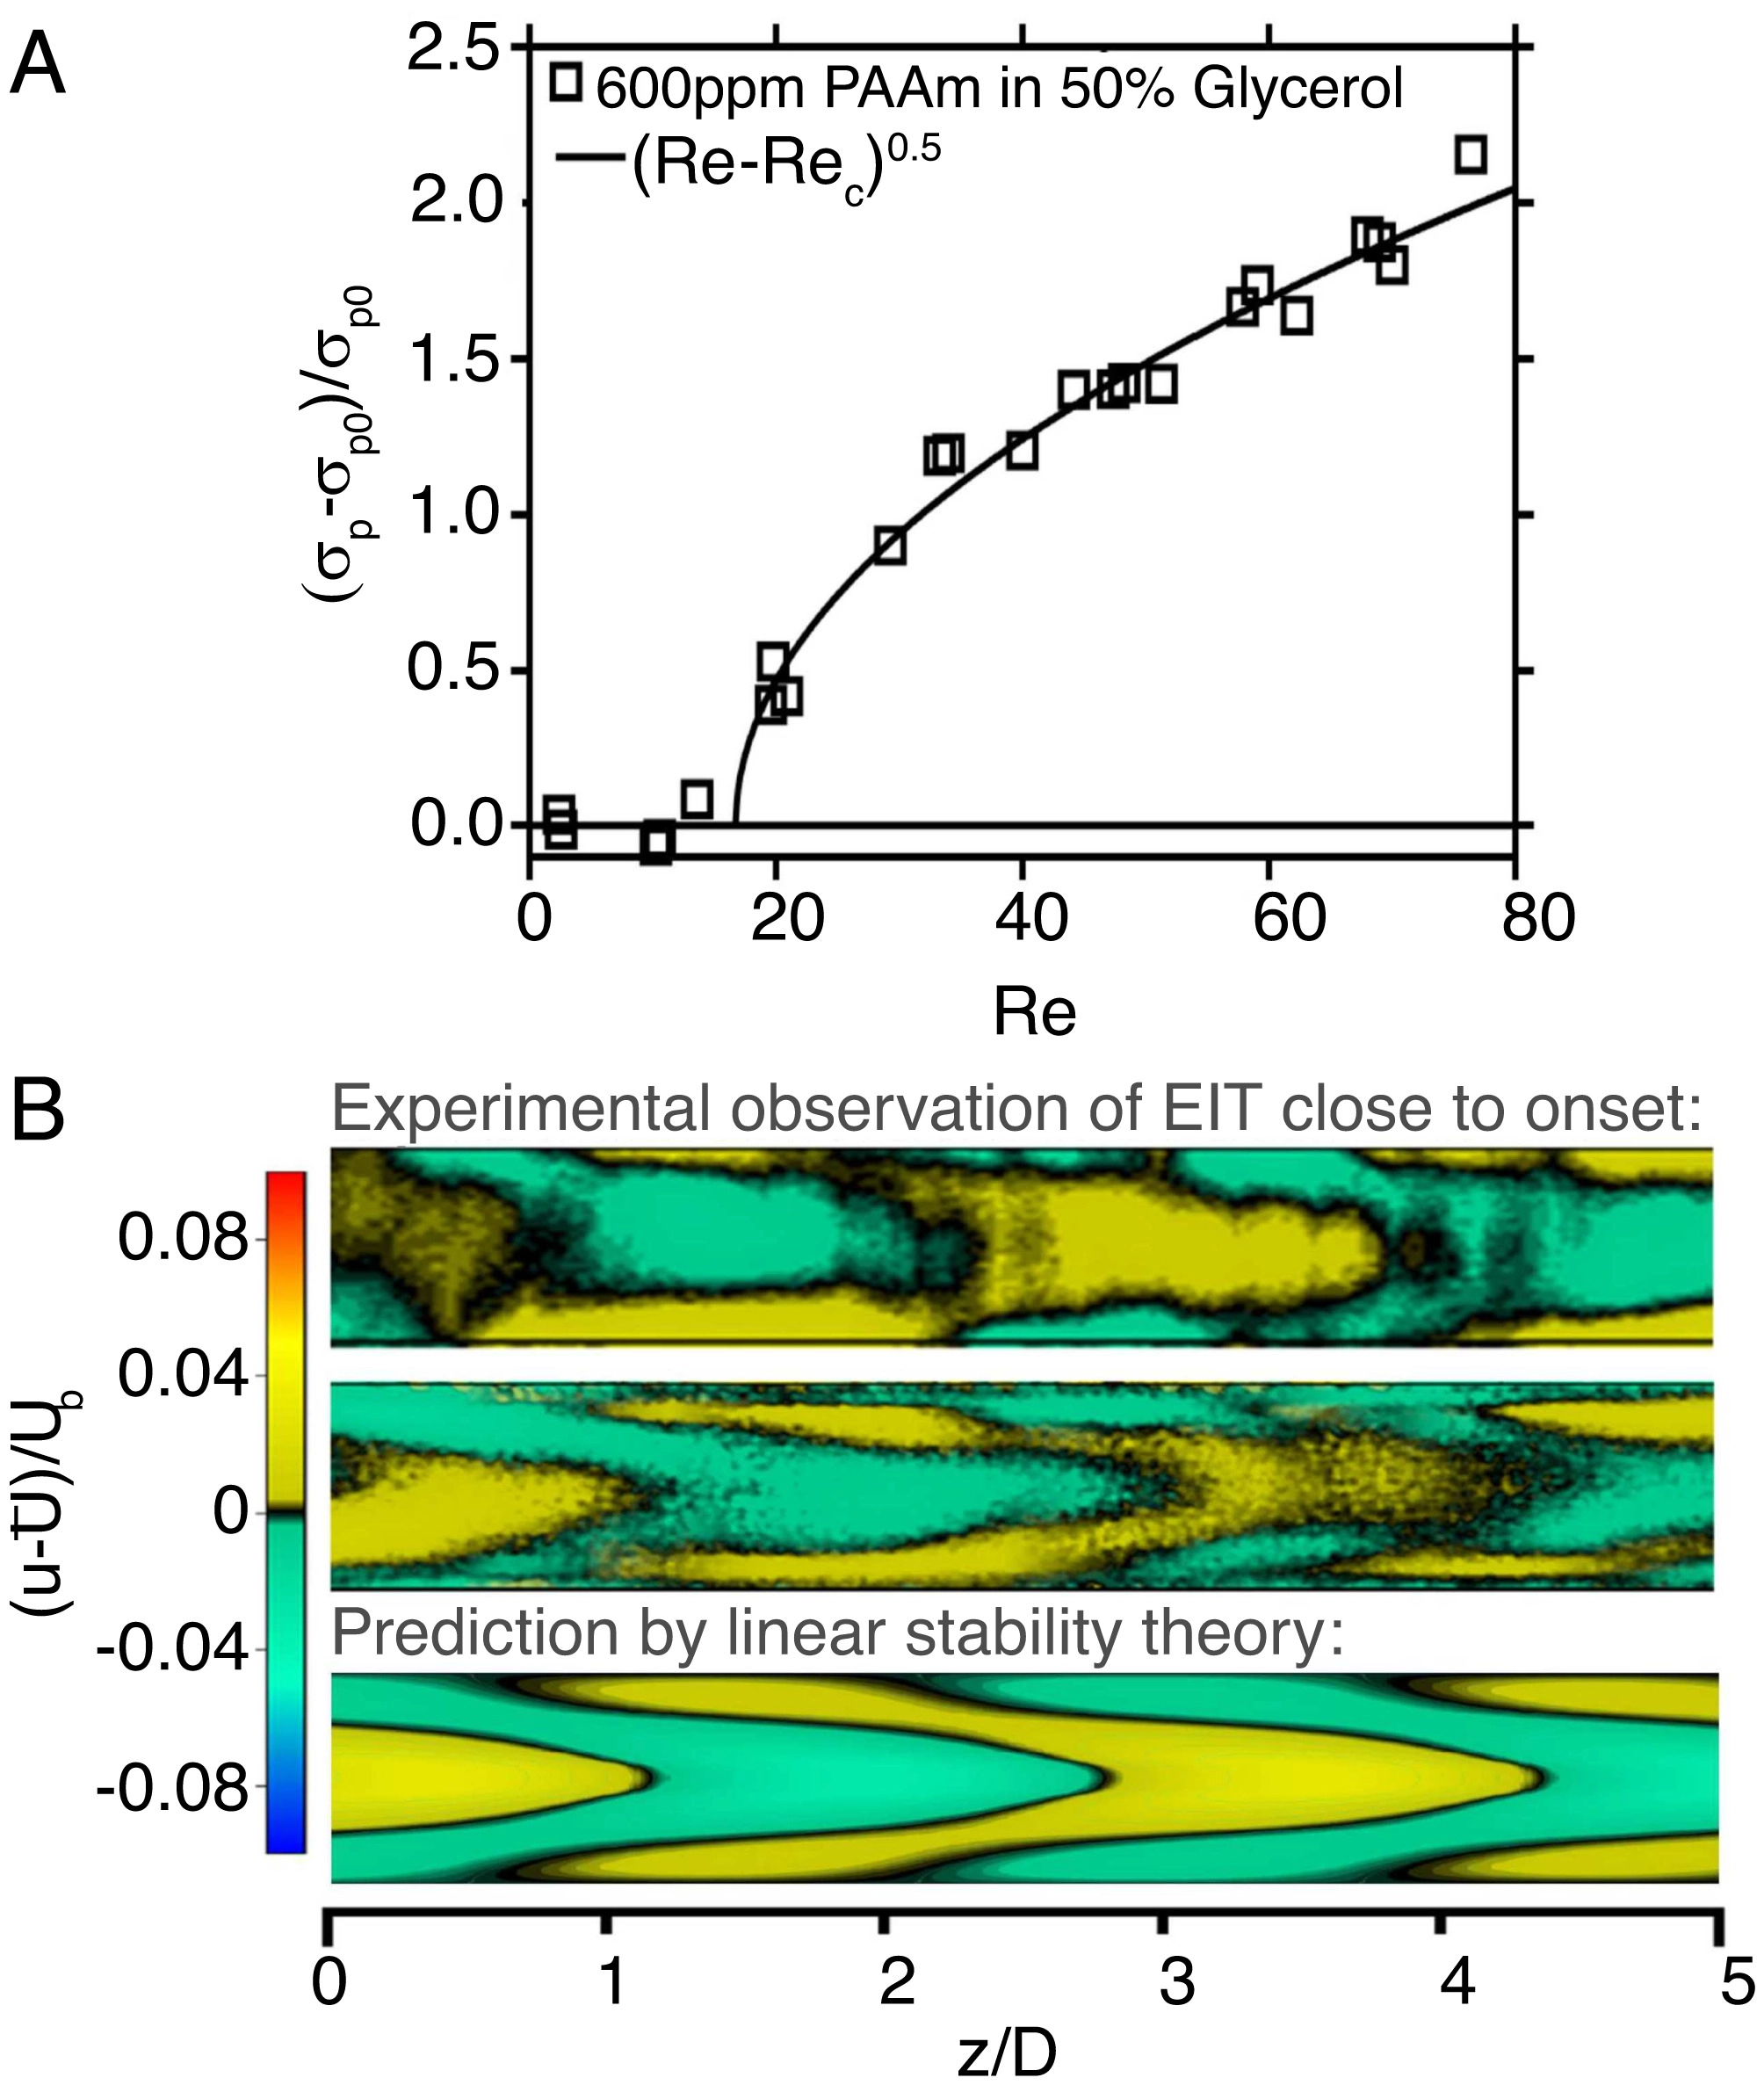 Fluctuations level and flow structure near the onset of elastoinertial instability. (A) Evolution of the pressure fluctuations amplitude with increasing Re close to the instability threshold for experiments using 600 ppm of PAAm dissolved in a 50% water glycerol mixture. (B) Flow structures composition at Reynolds numbers near transition. Top and Middle show streamwise velocity fluctuations obtained from PIV measurements in a longitudinal cross-section. Lower shows the most unstable mode in the linear stability analysis..